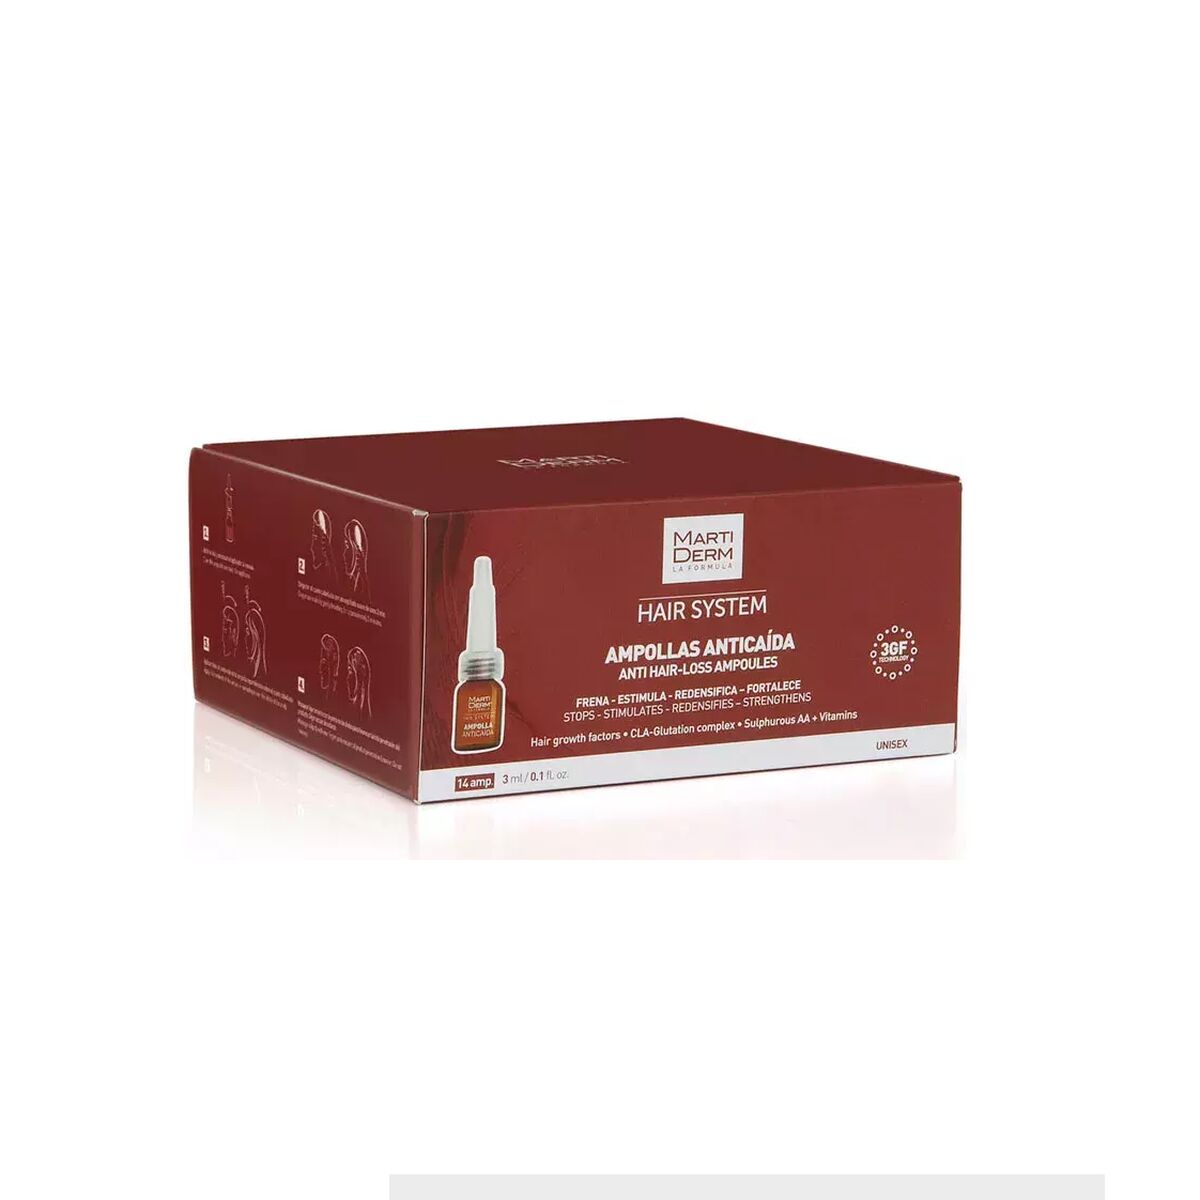 Anti-Hair Loss Ampoulles Martiderm Hair System 3 ml 14 Units